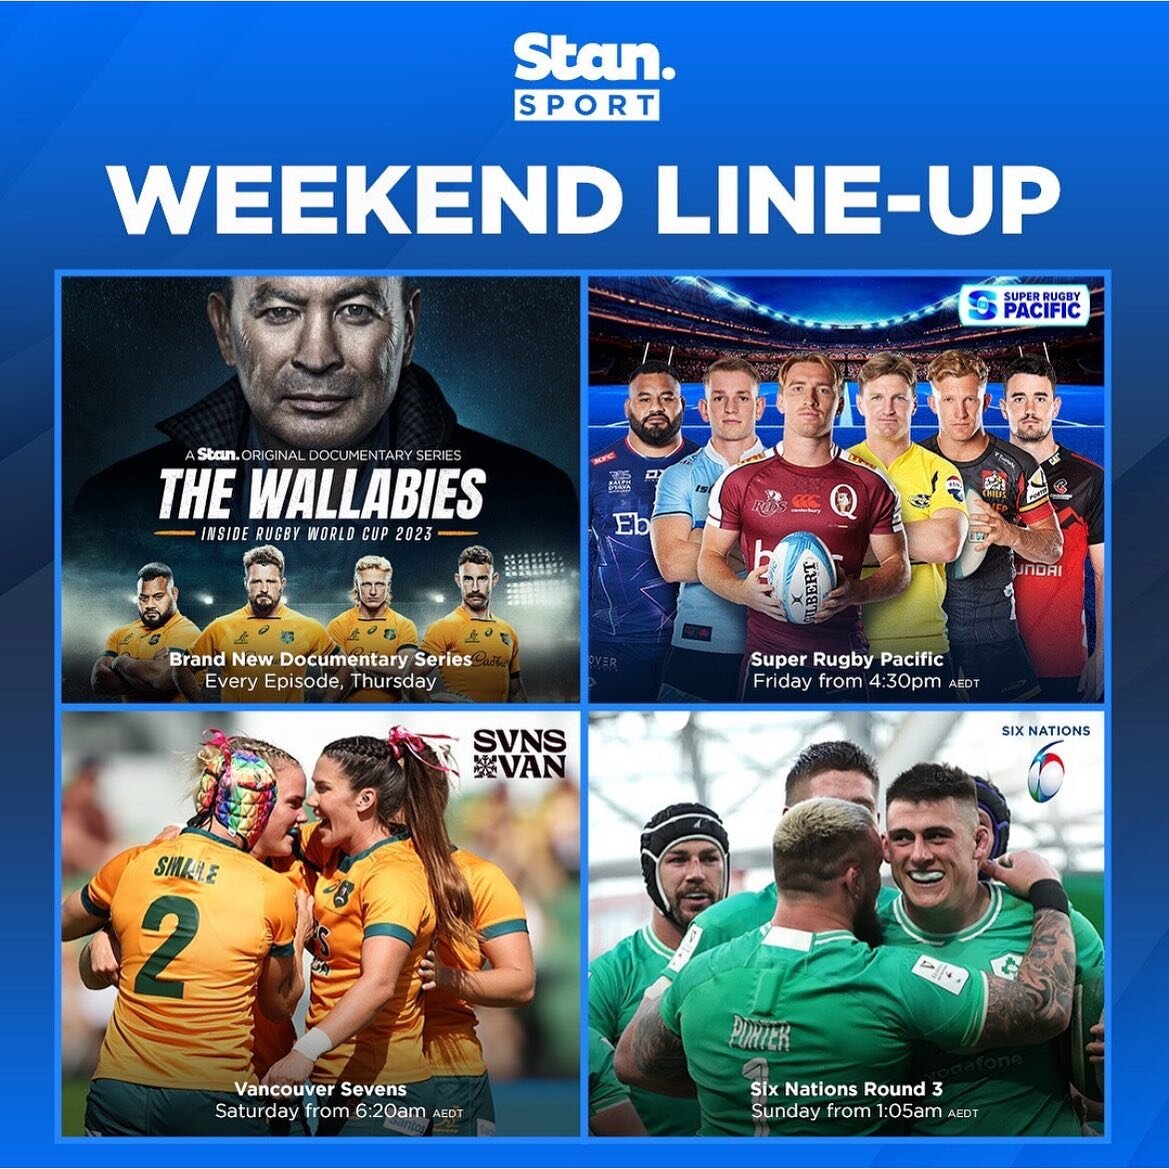 Need a Rugby fix this weekend? We are now an offical Stan Sports venue and have all the Rugby your heart desires 😍